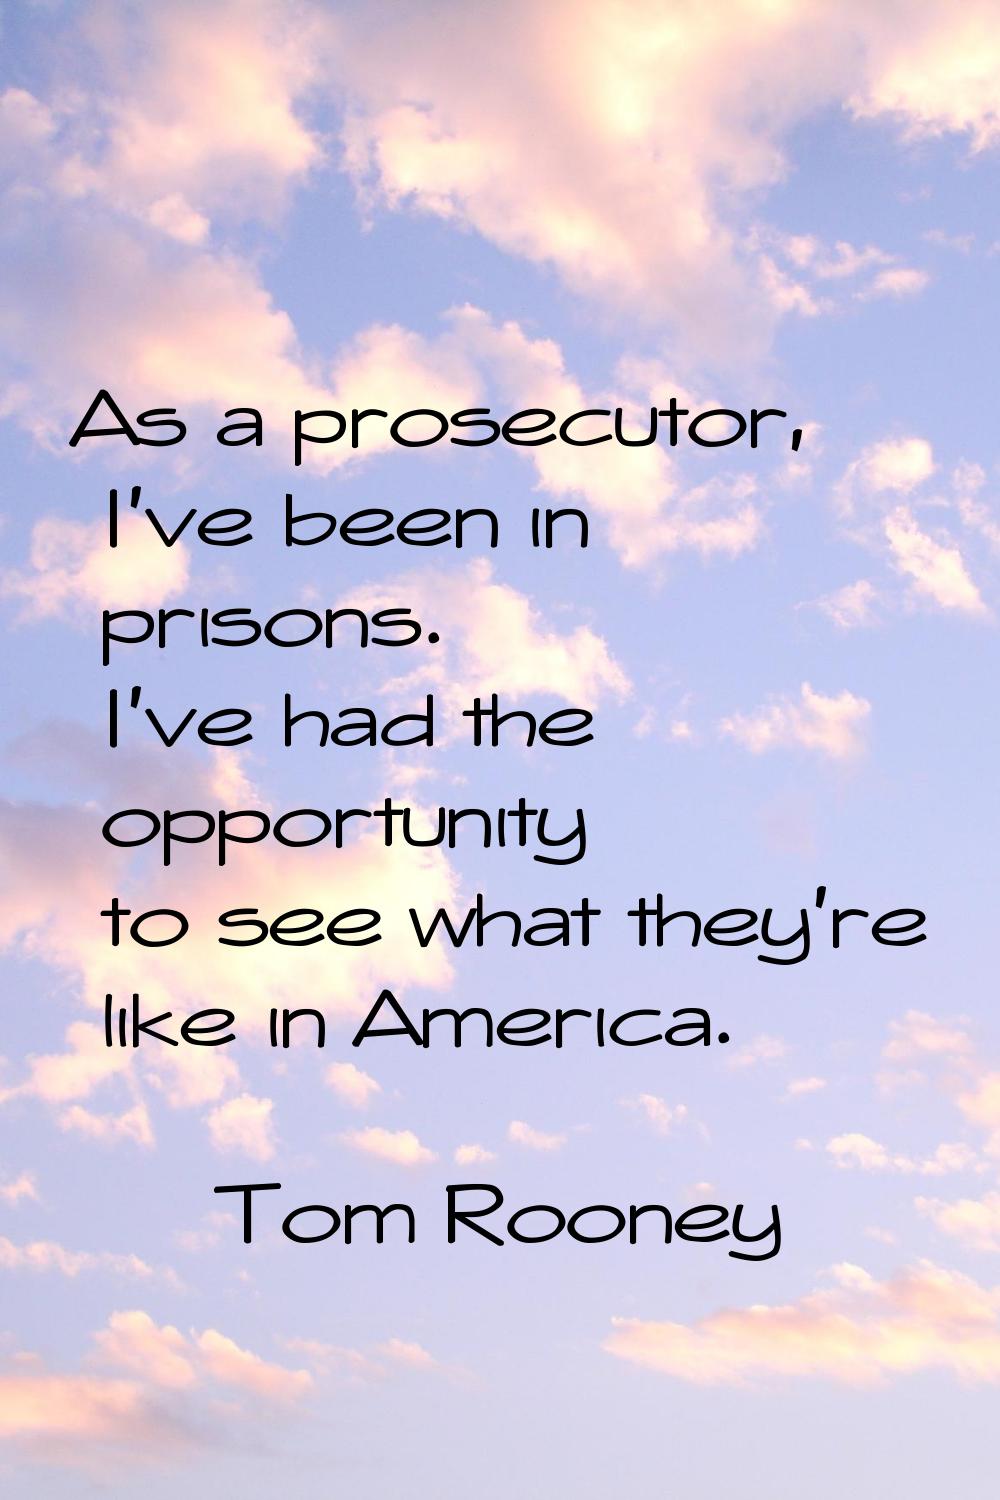 As a prosecutor, I've been in prisons. I've had the opportunity to see what they're like in America